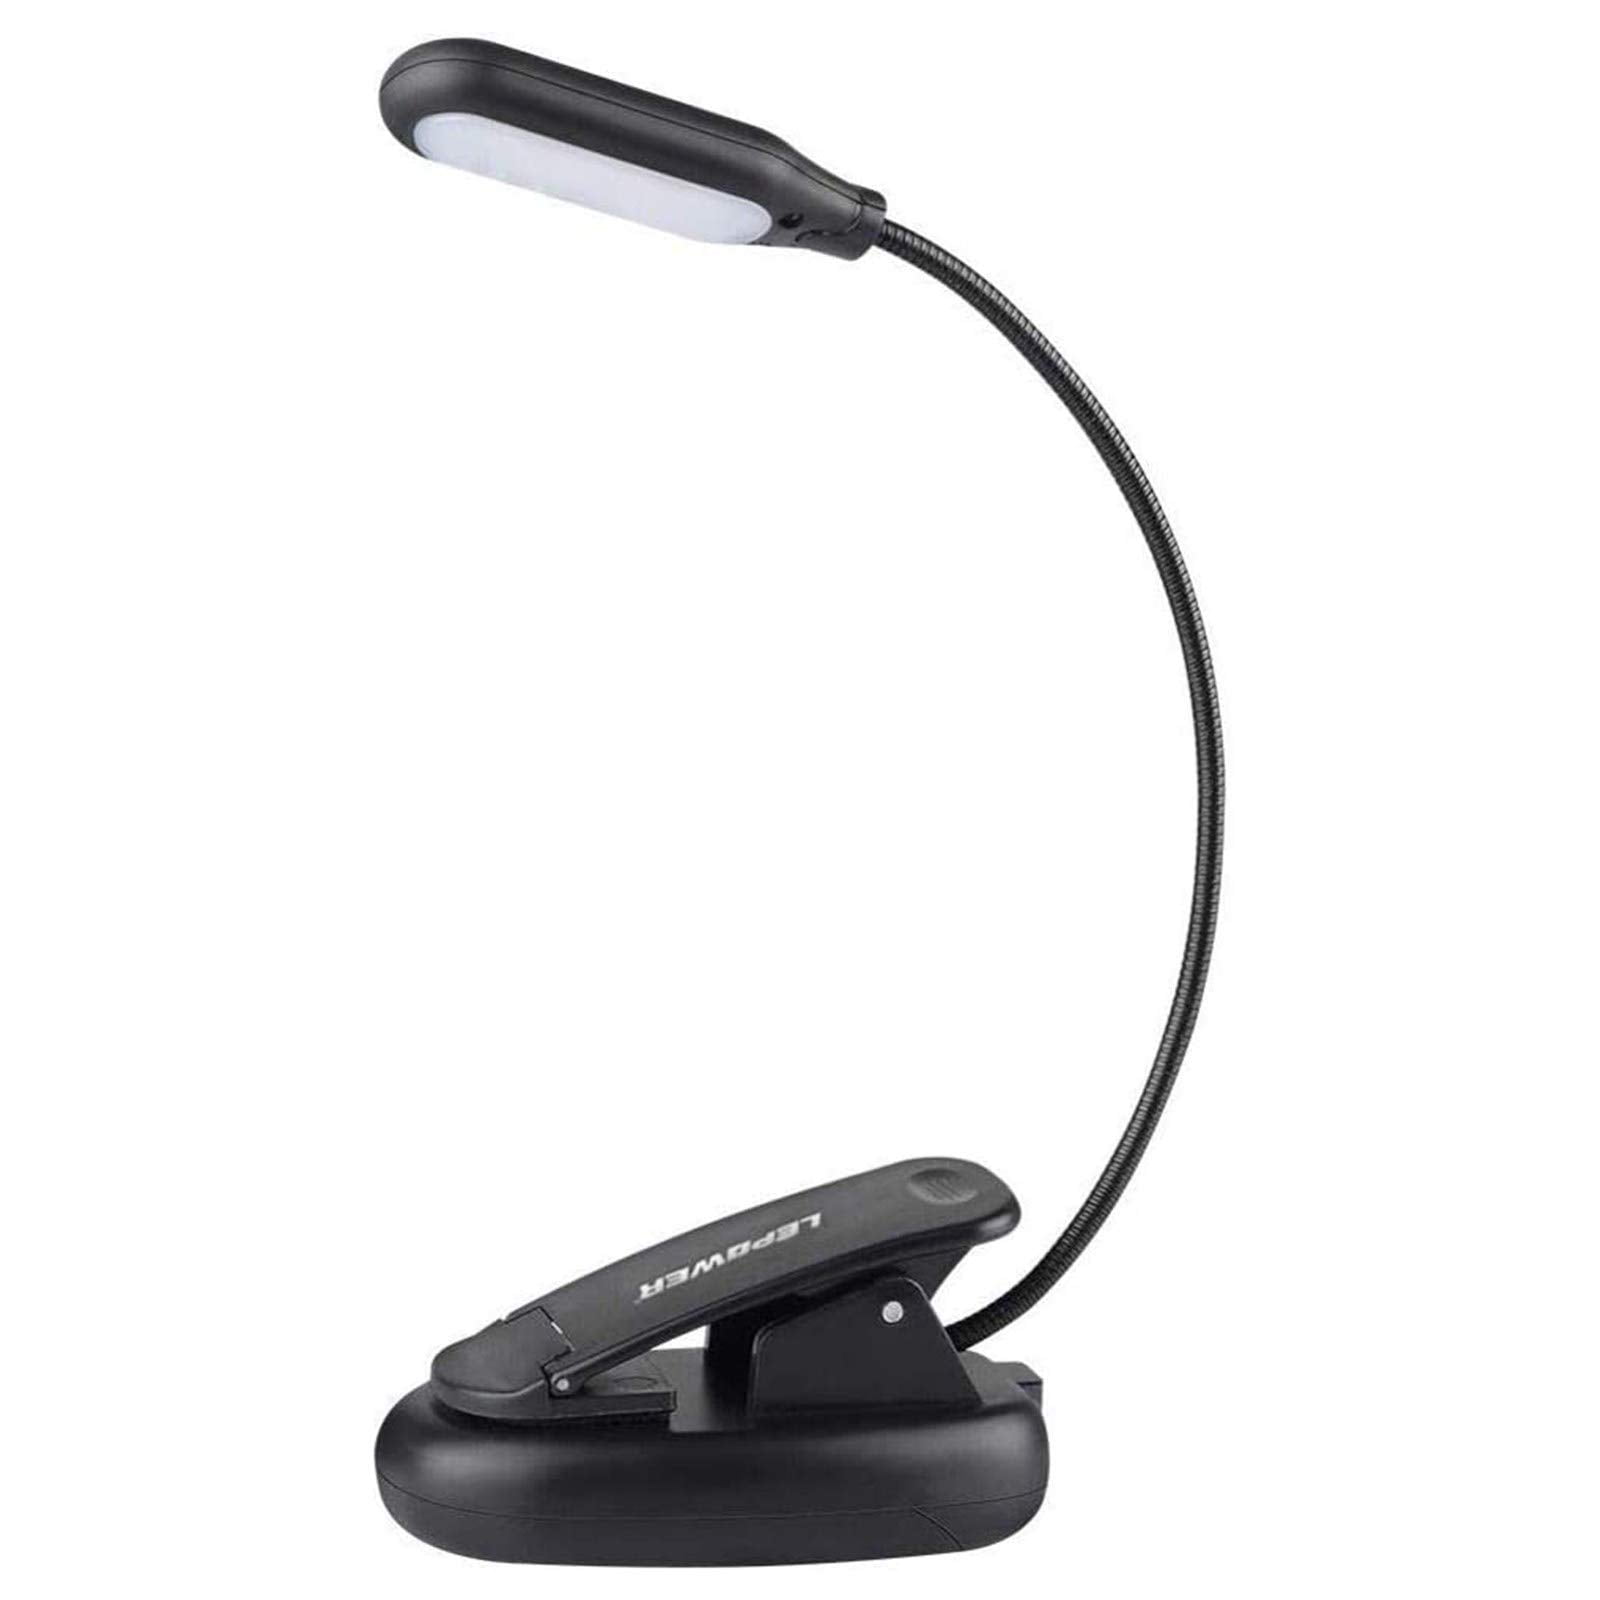 LEPOWER Clip on Book Light, Reading Light, Battery & USB Operated